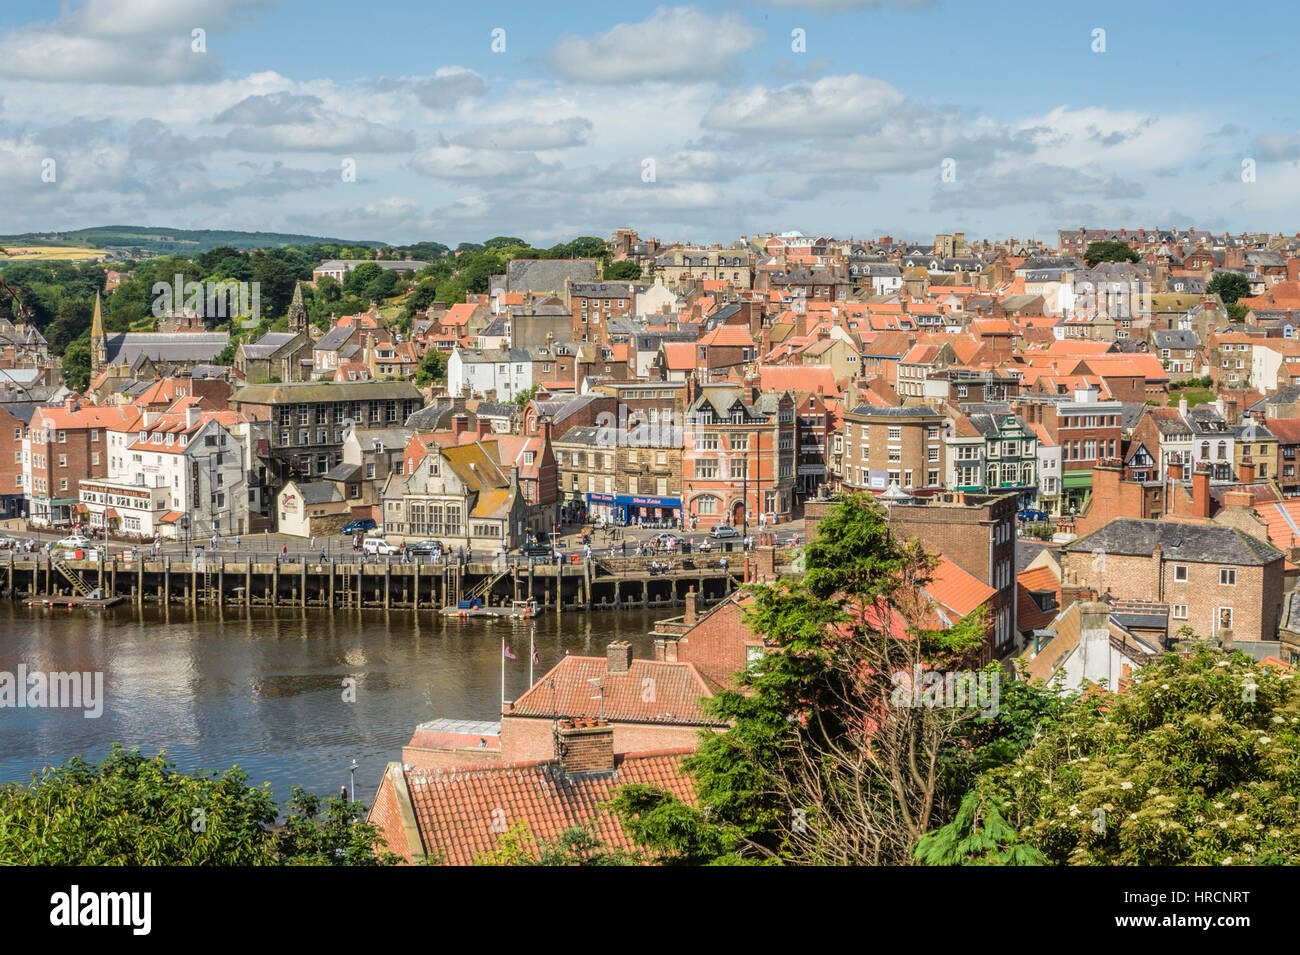 Elevated view over old town of Whitby, England, UK Stock Photo